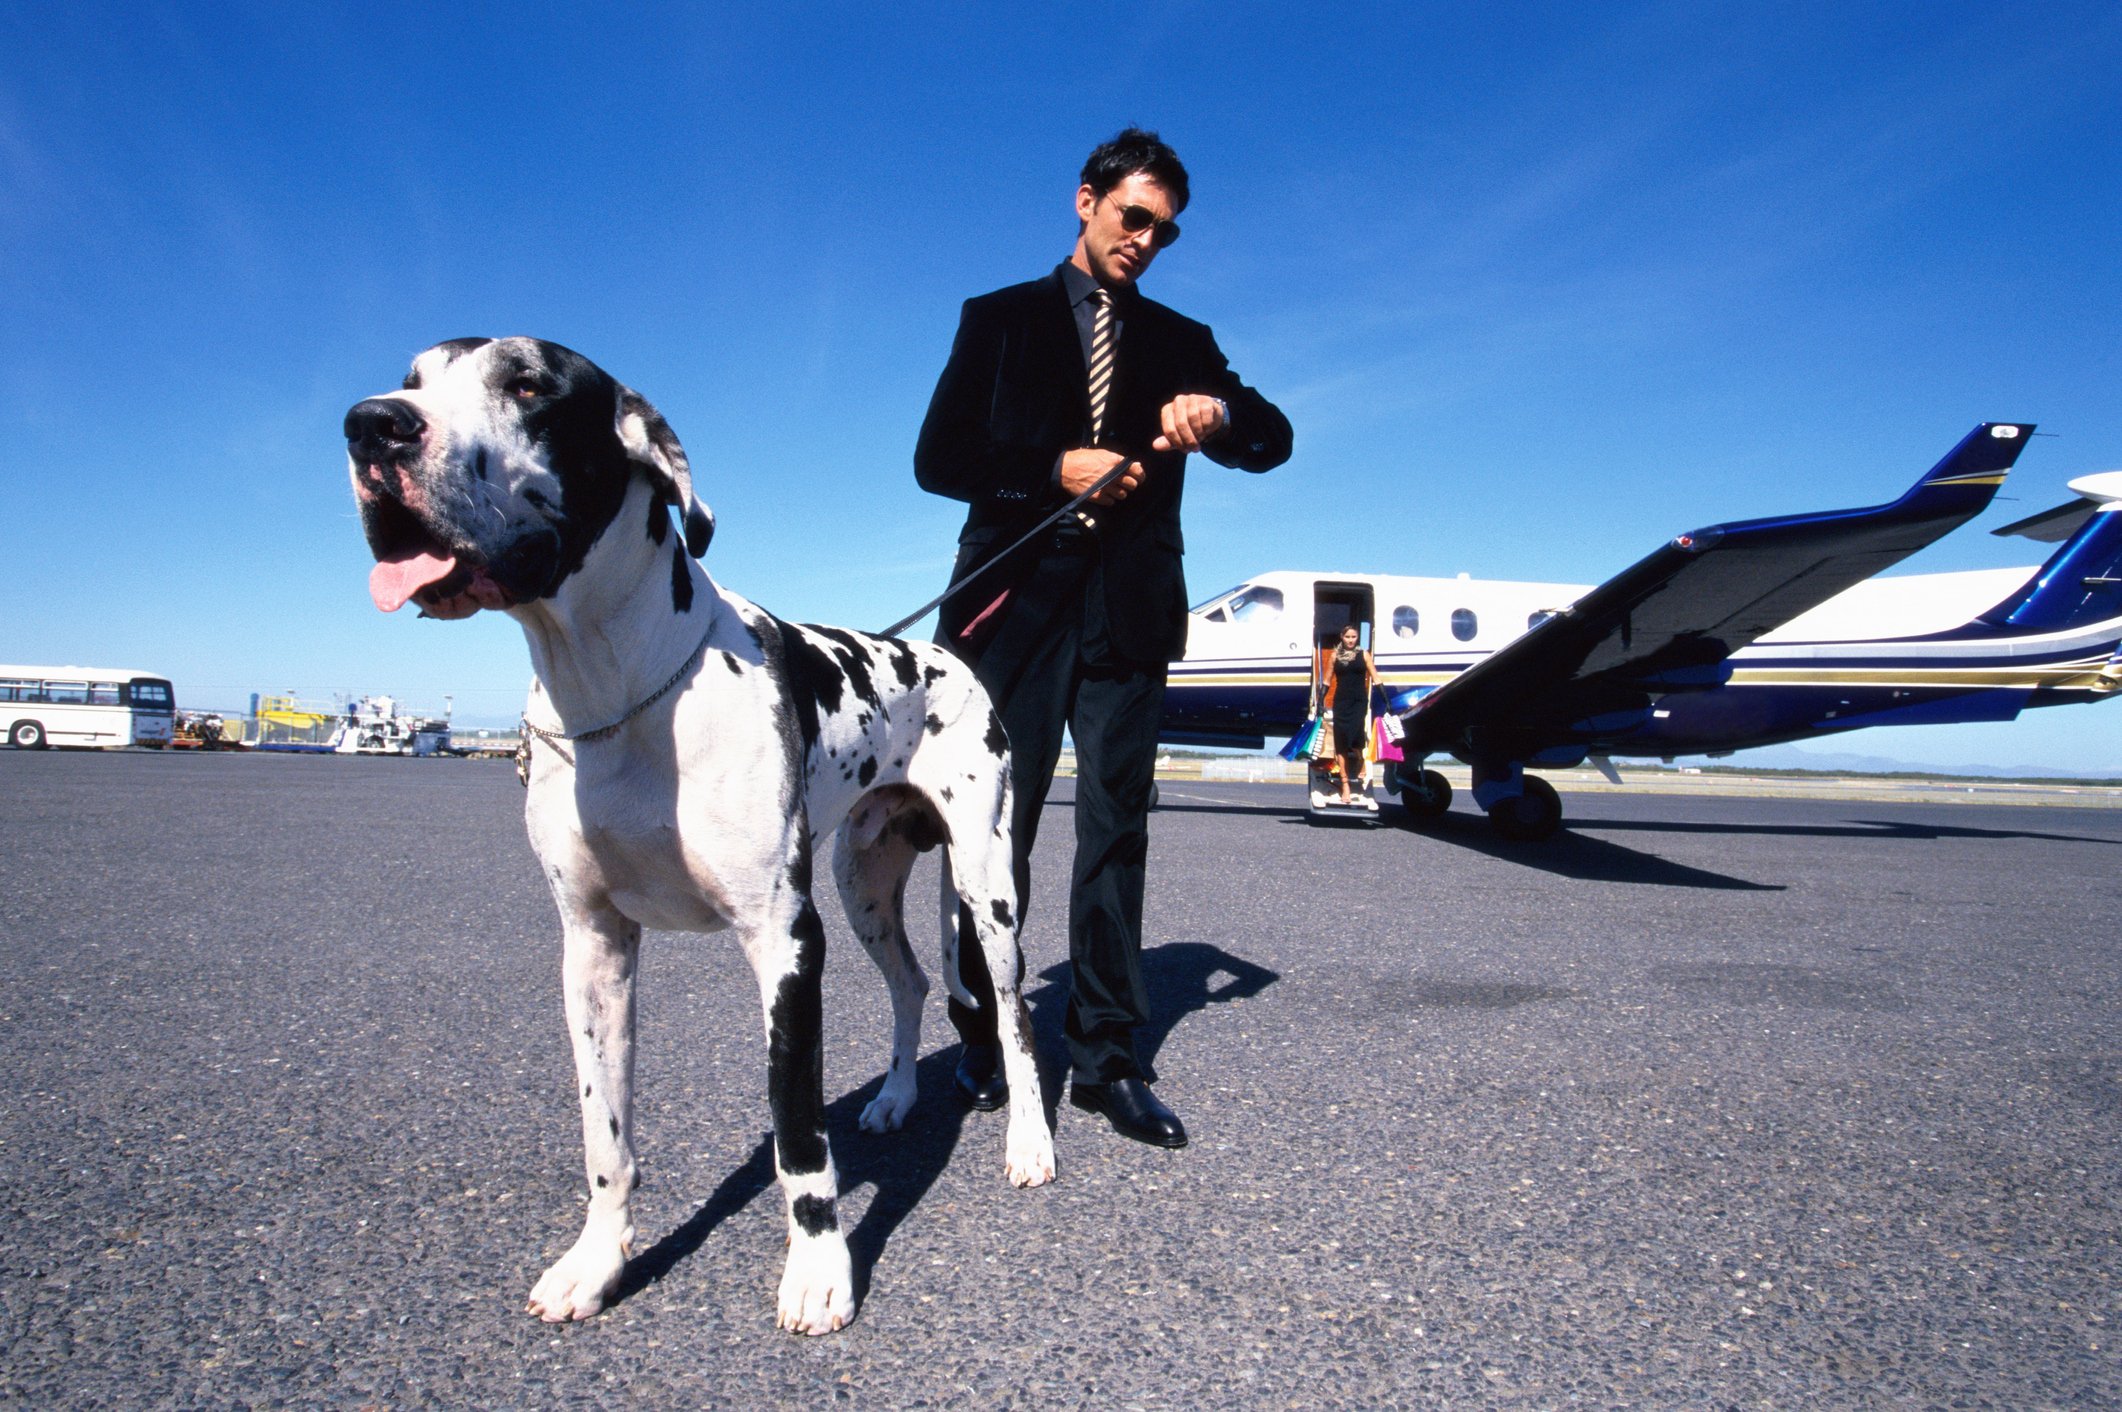 Man in black suit holding his dog after alighting a plane. | Photo: Getty Images